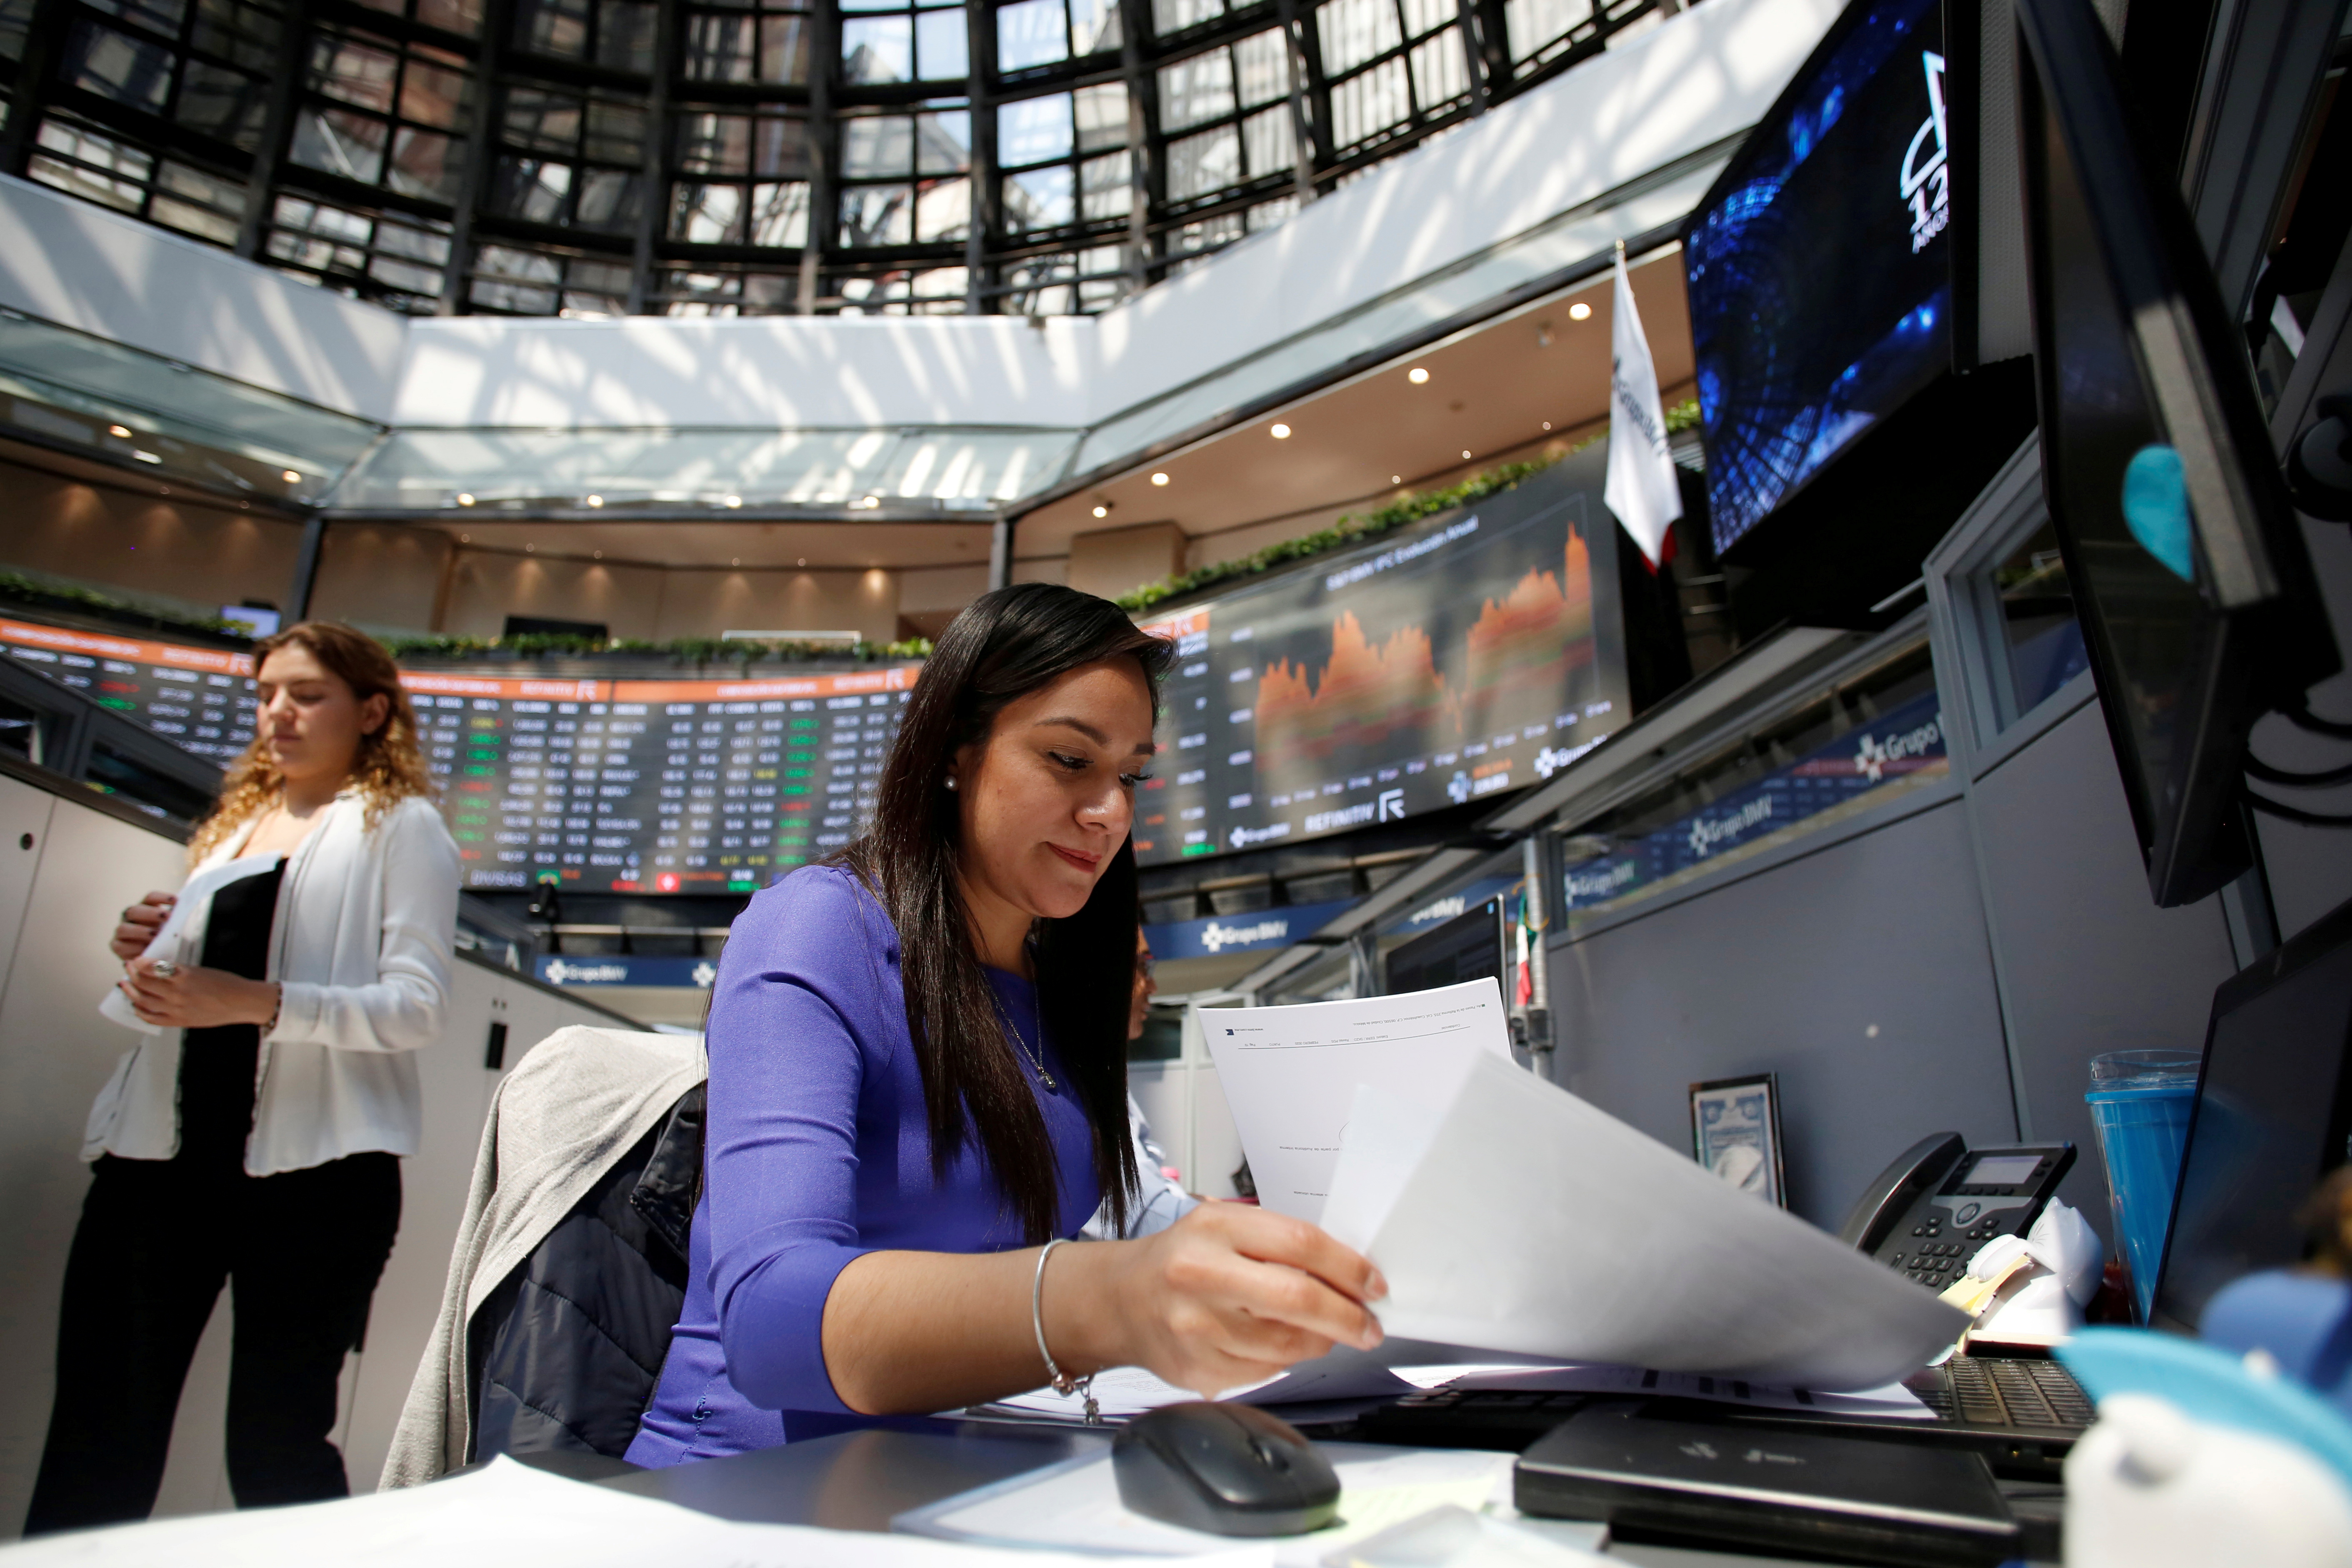 Employees work in Mexico's stock exchange in Mexico City